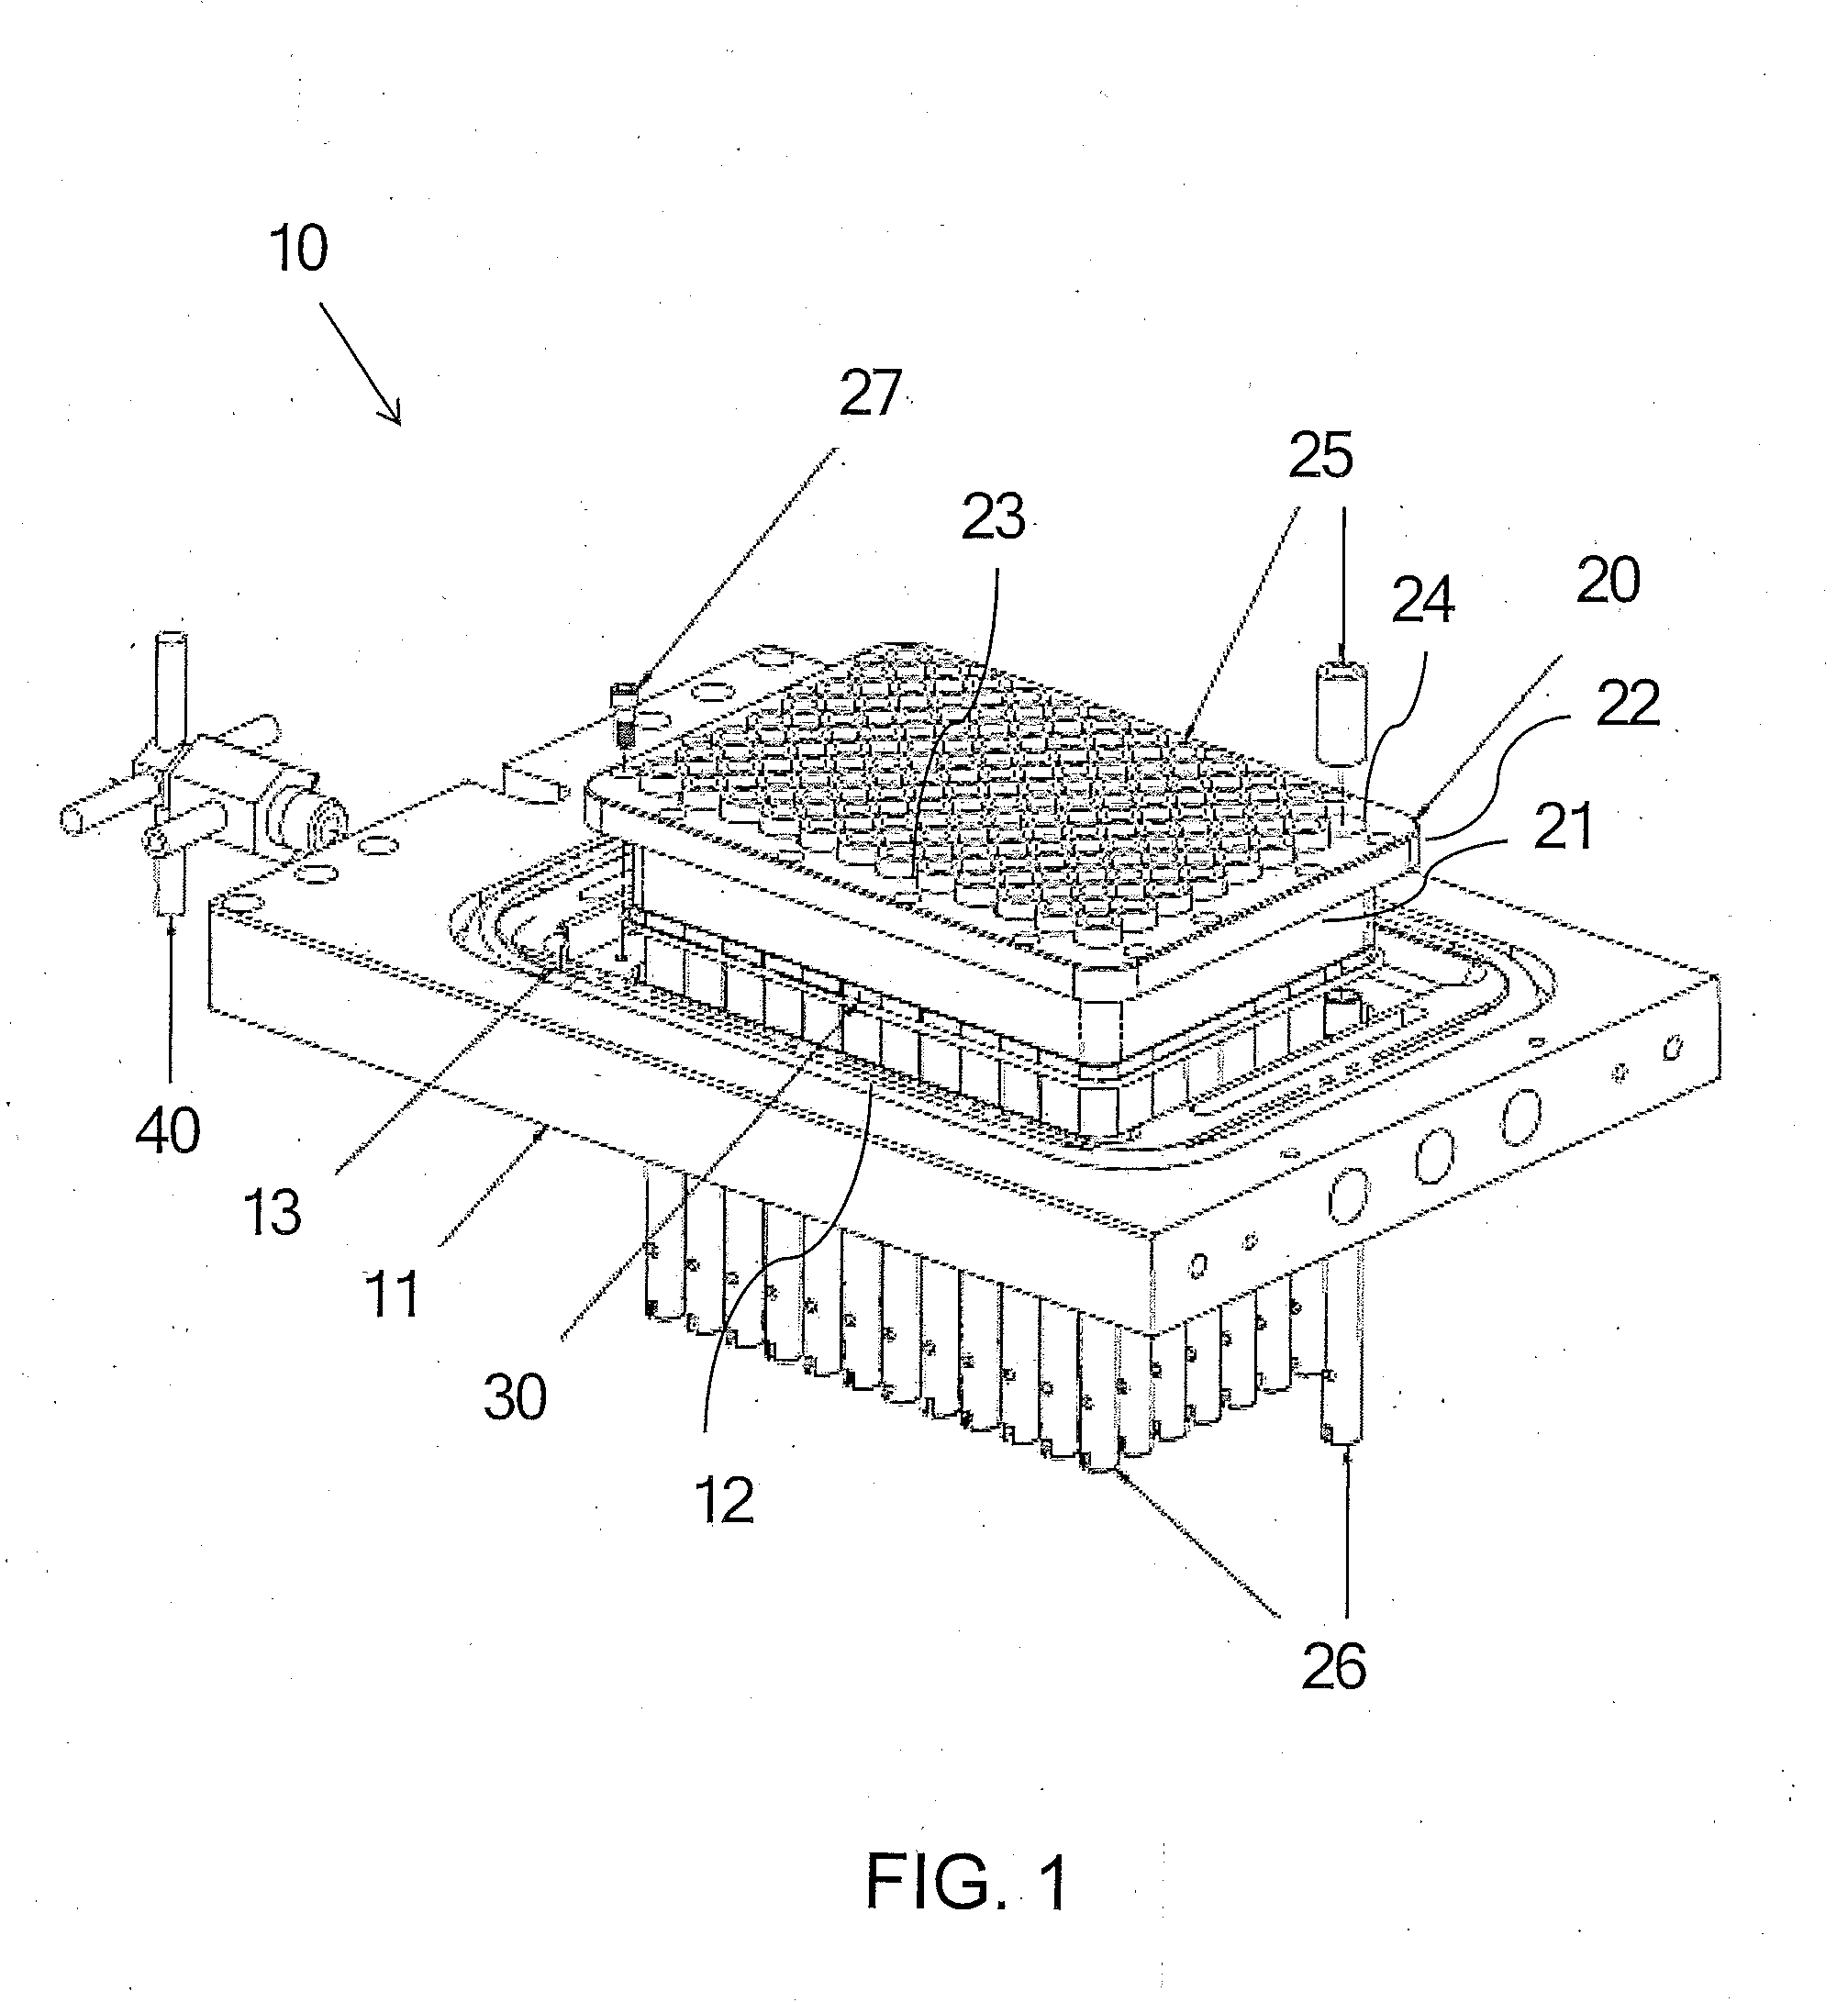 Multi-well manifold assembly system for oligonucleotide synthesis